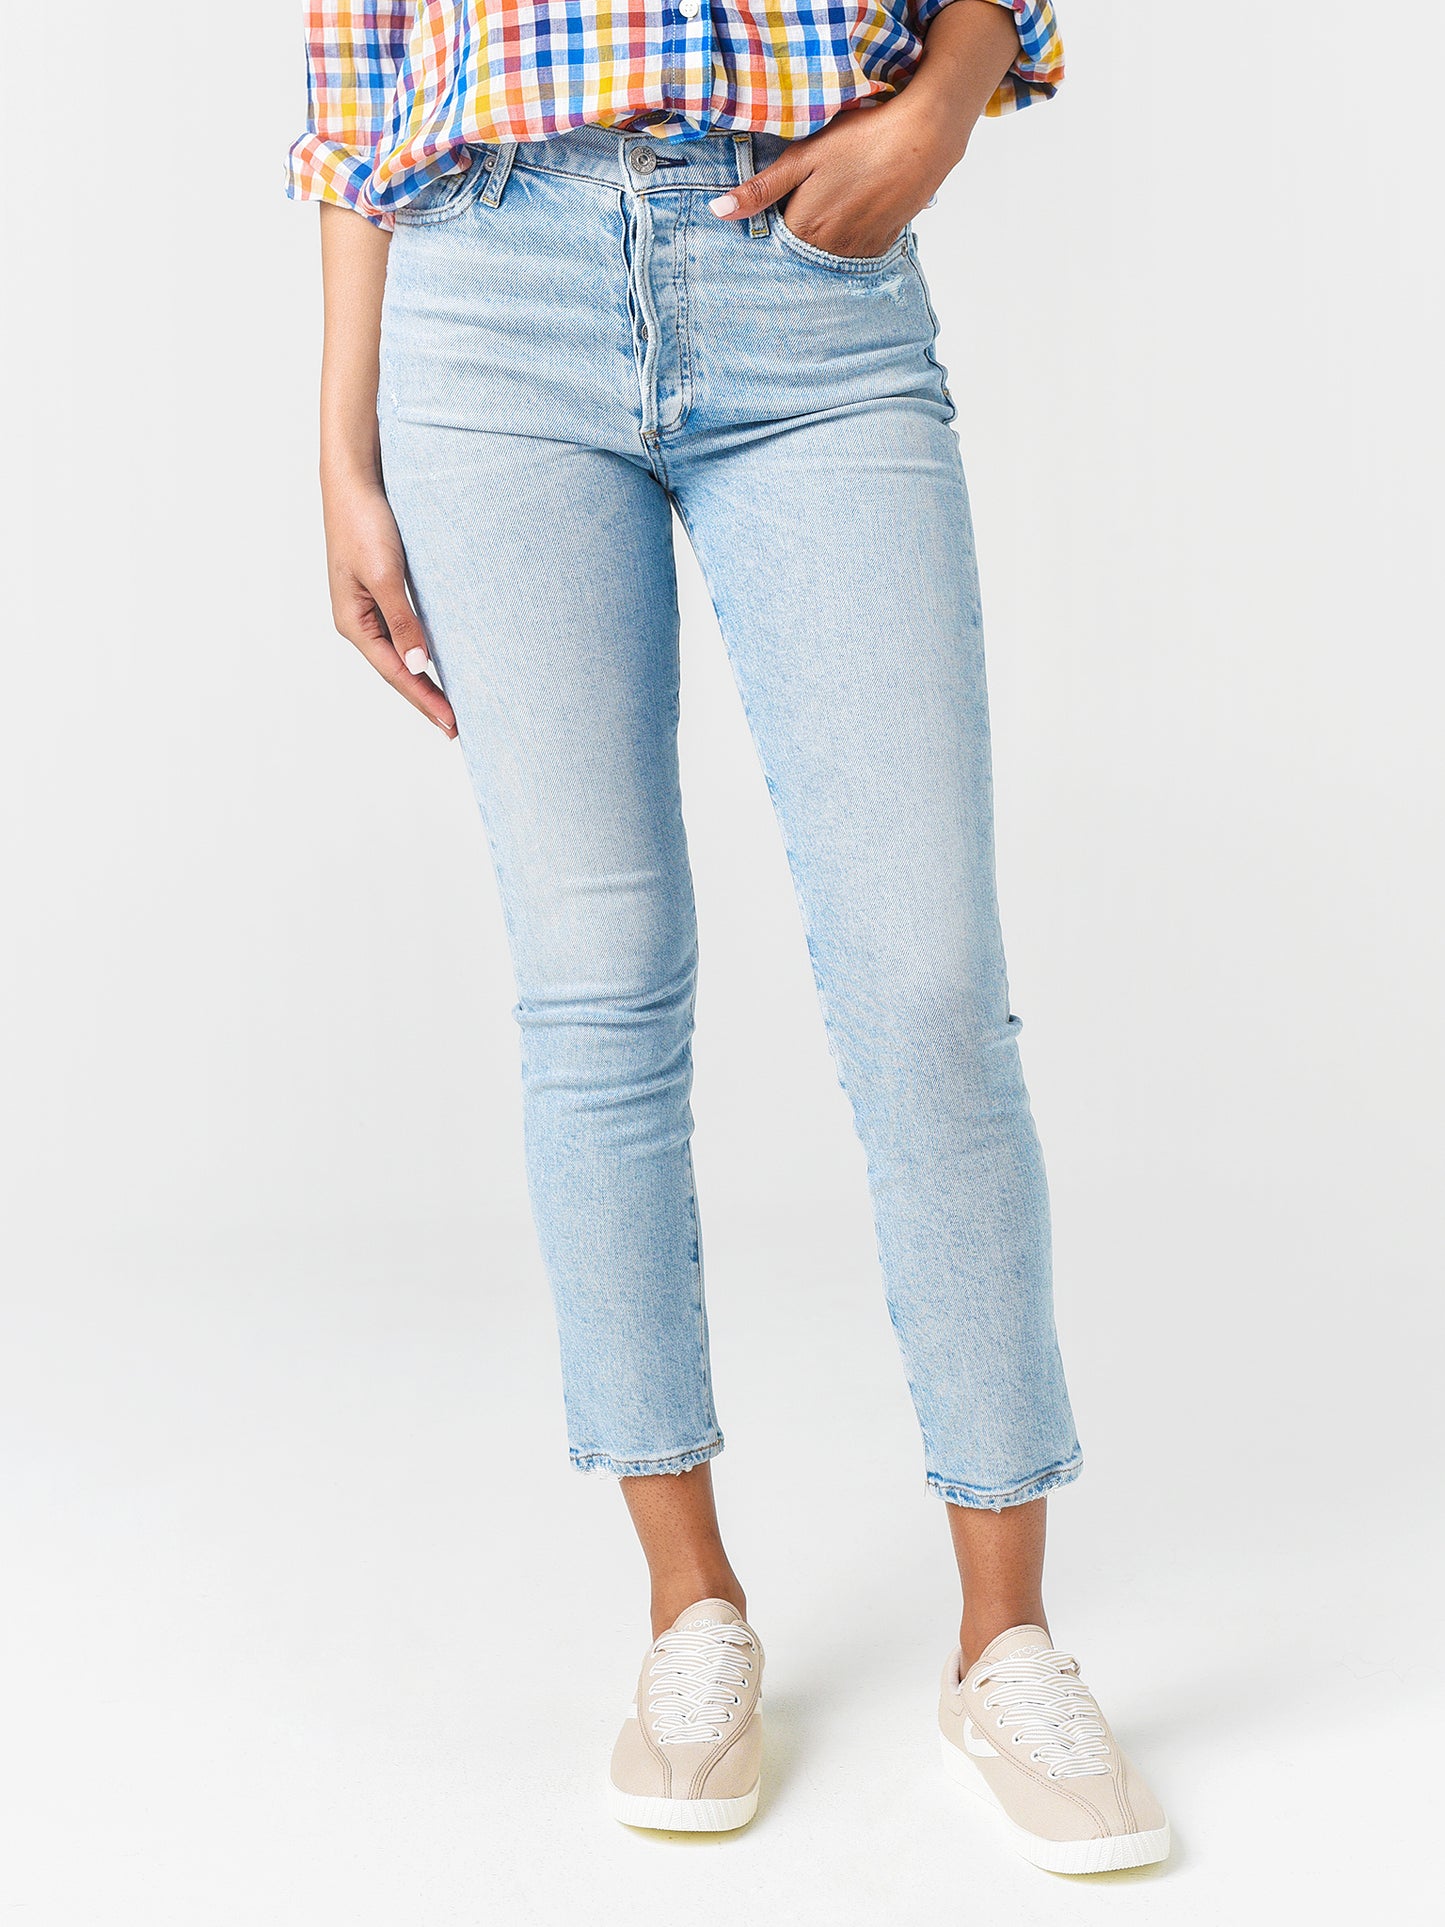 Citizens Of Humanity Women's Olivia High-Rise Slim Fit Jean